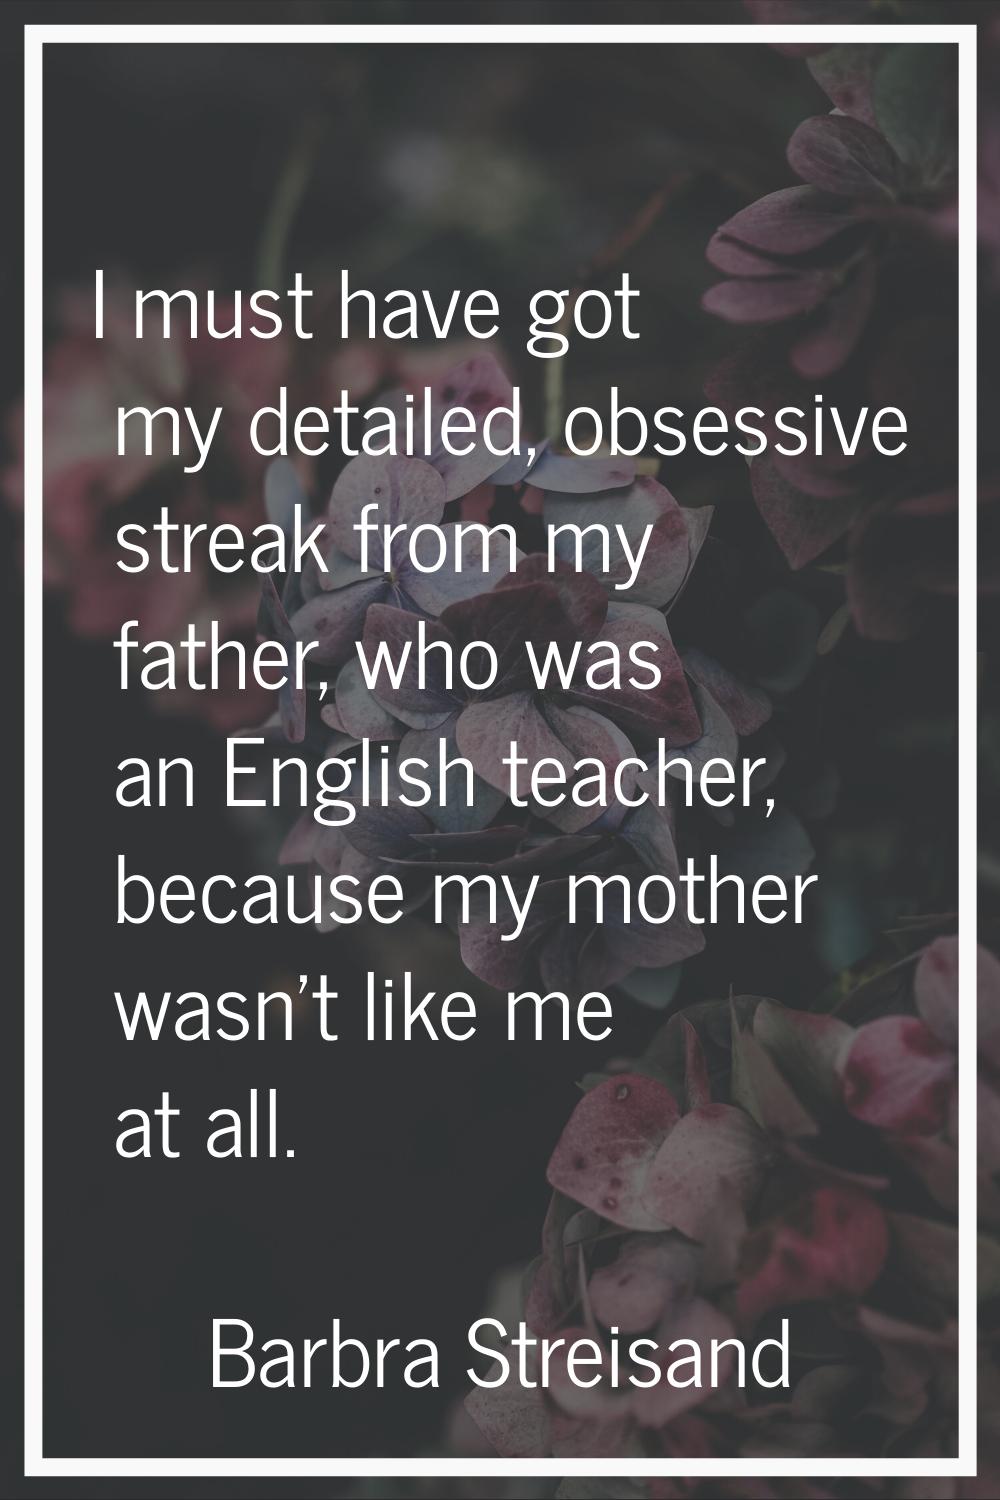 I must have got my detailed, obsessive streak from my father, who was an English teacher, because m